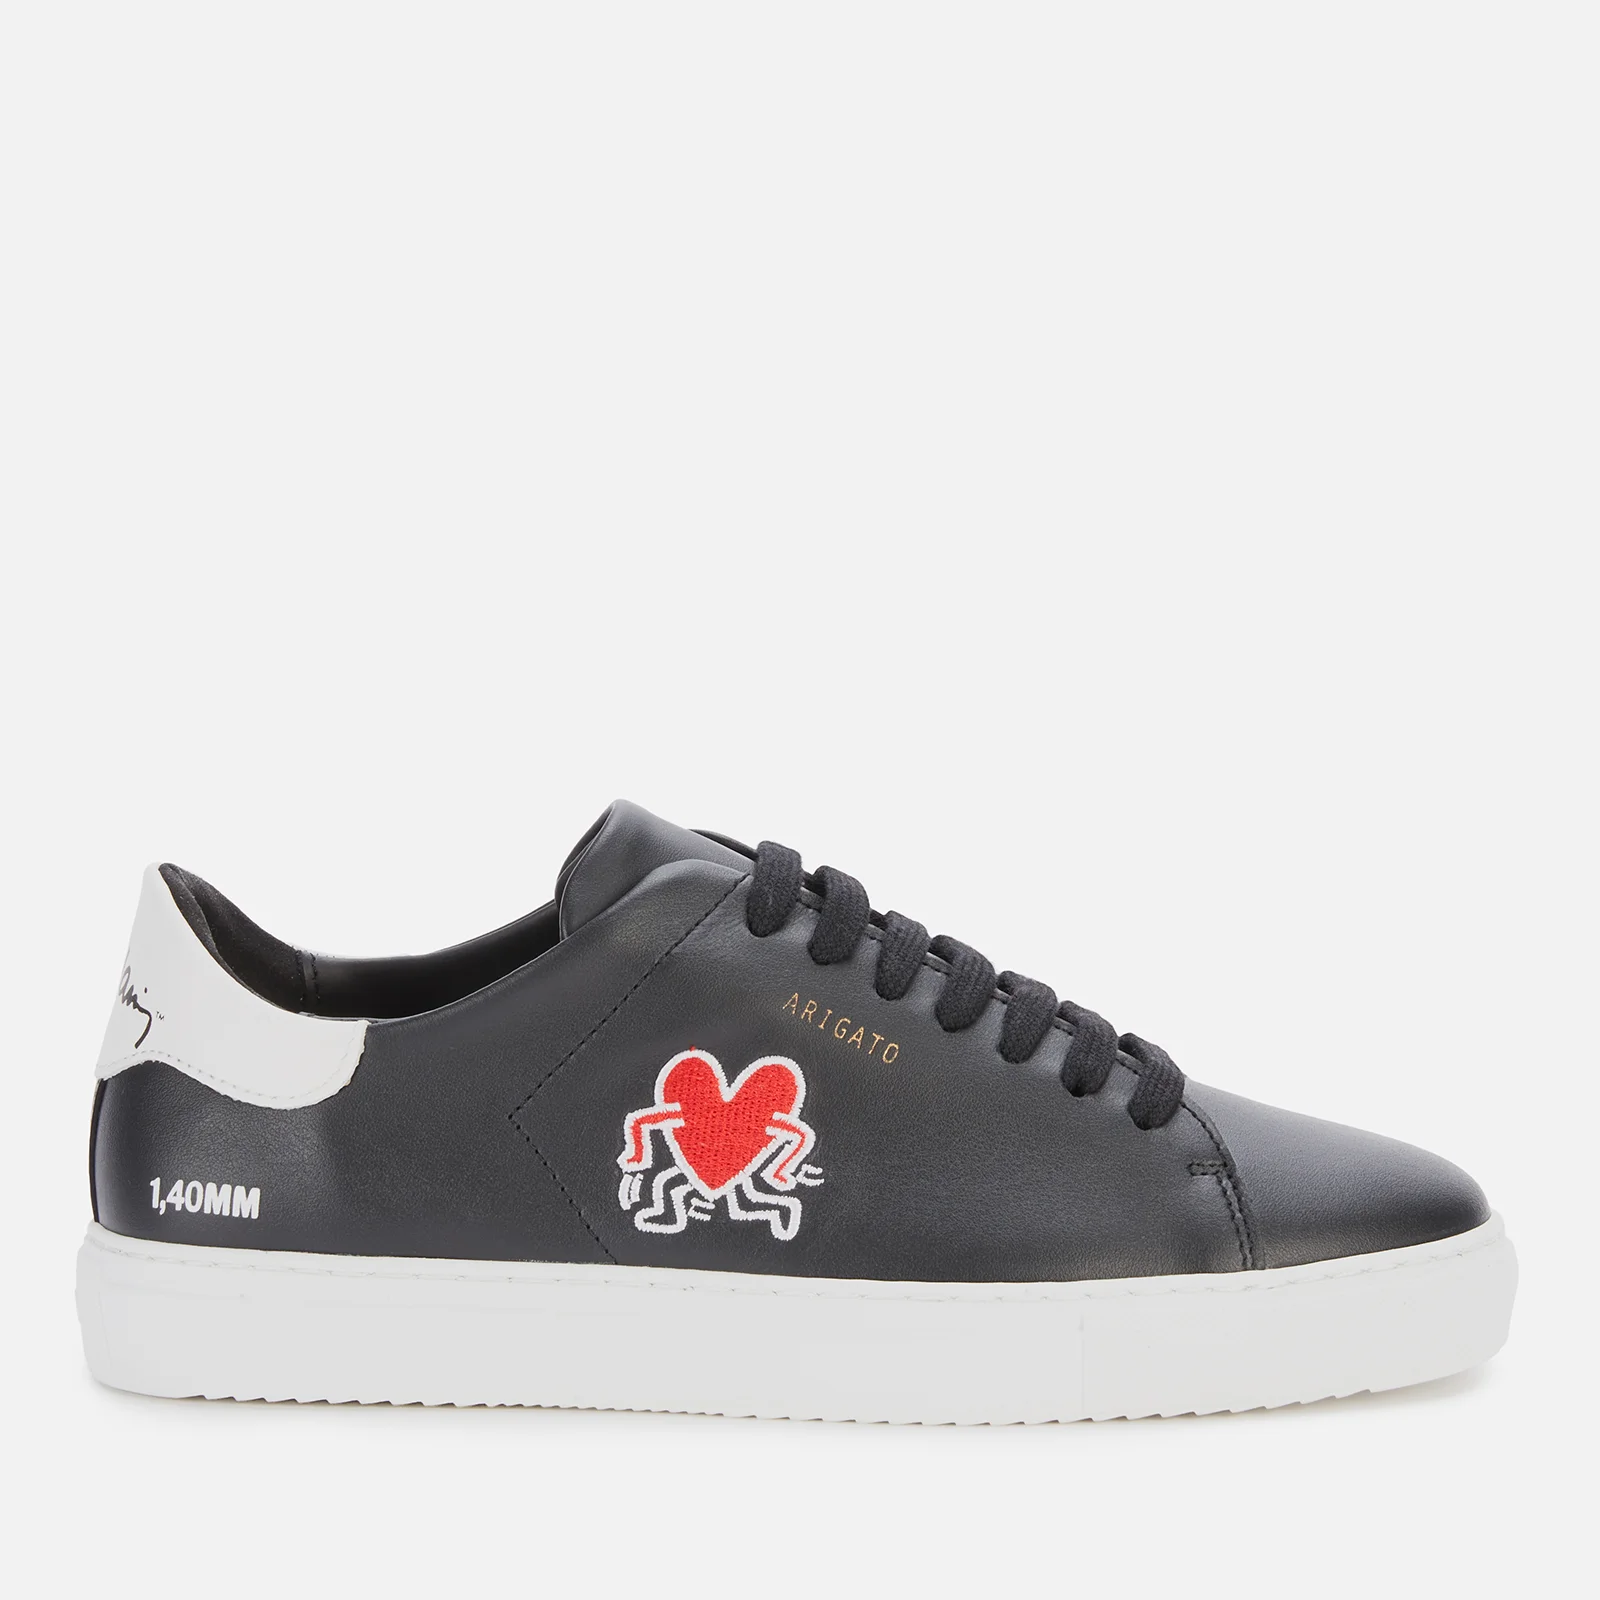 Axel Arigato Women's Keith Haring Clean 90 Leather Cupsole Trainers - Black Image 1